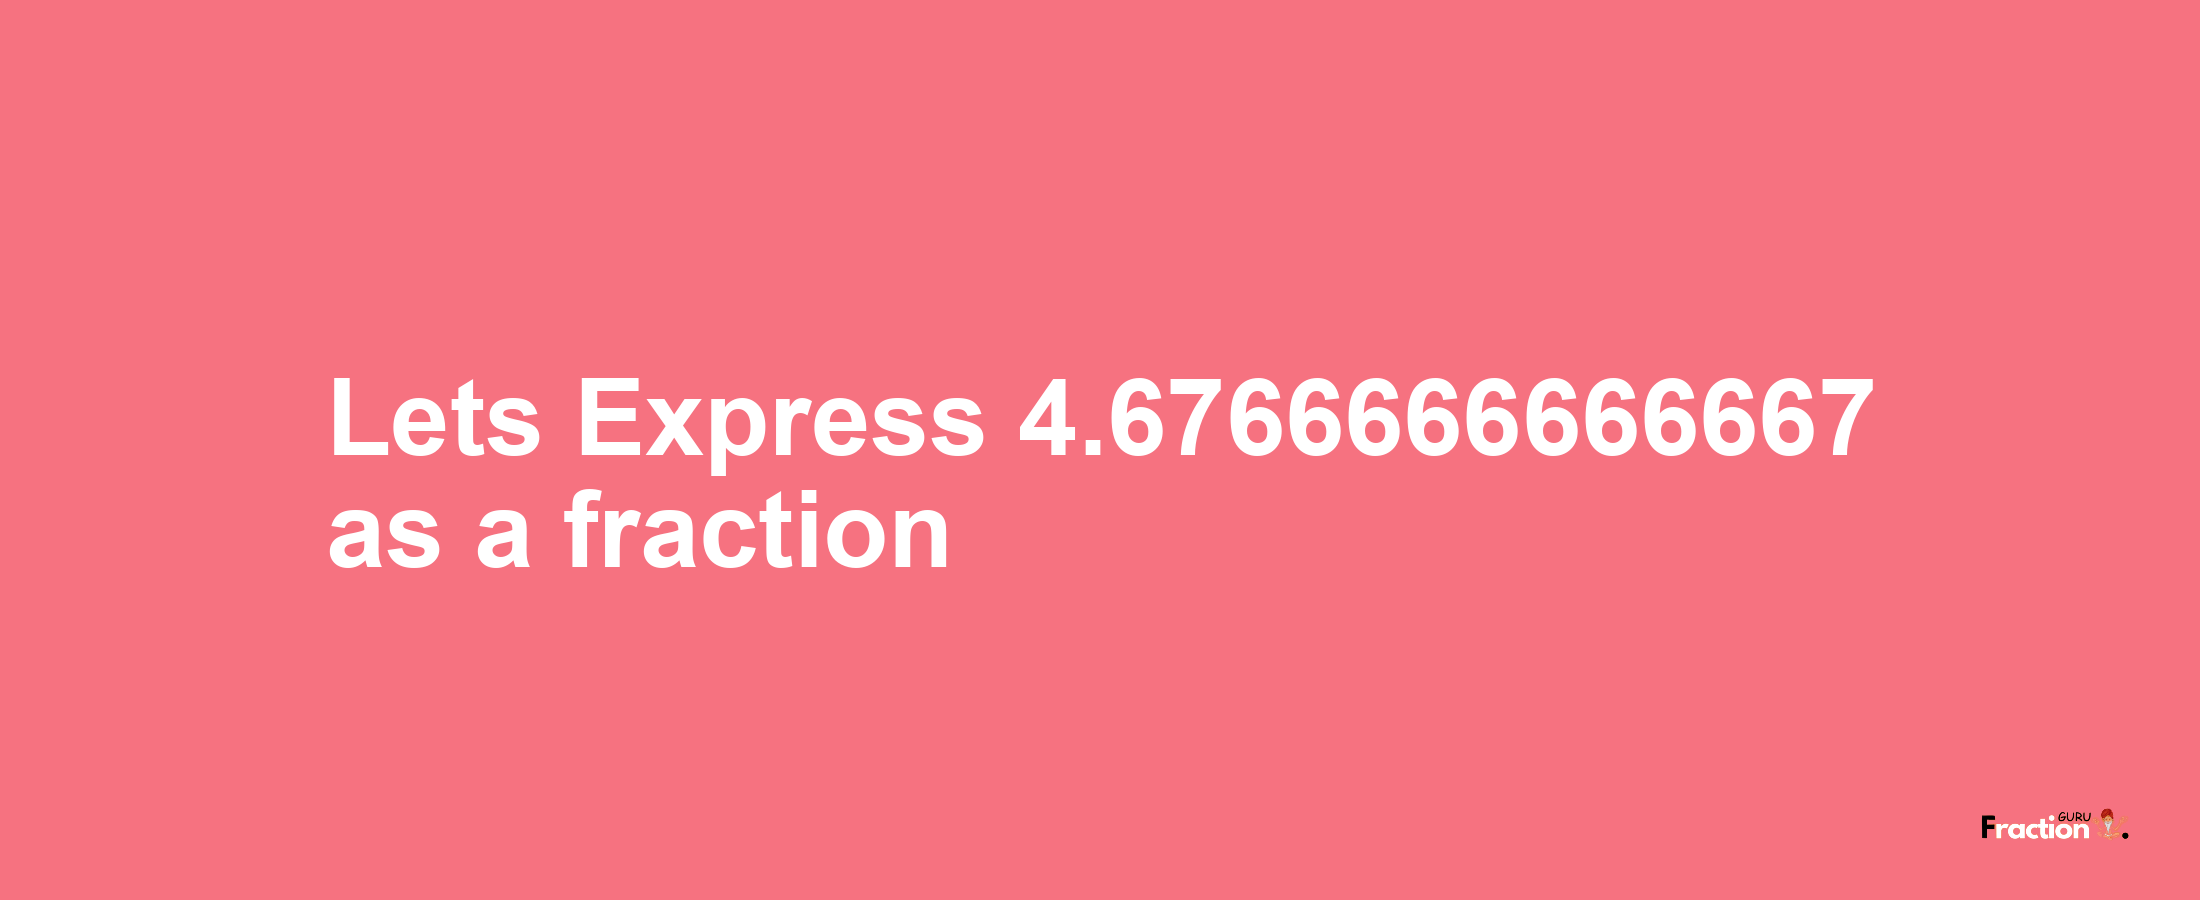 Lets Express 4.6766666666667 as afraction